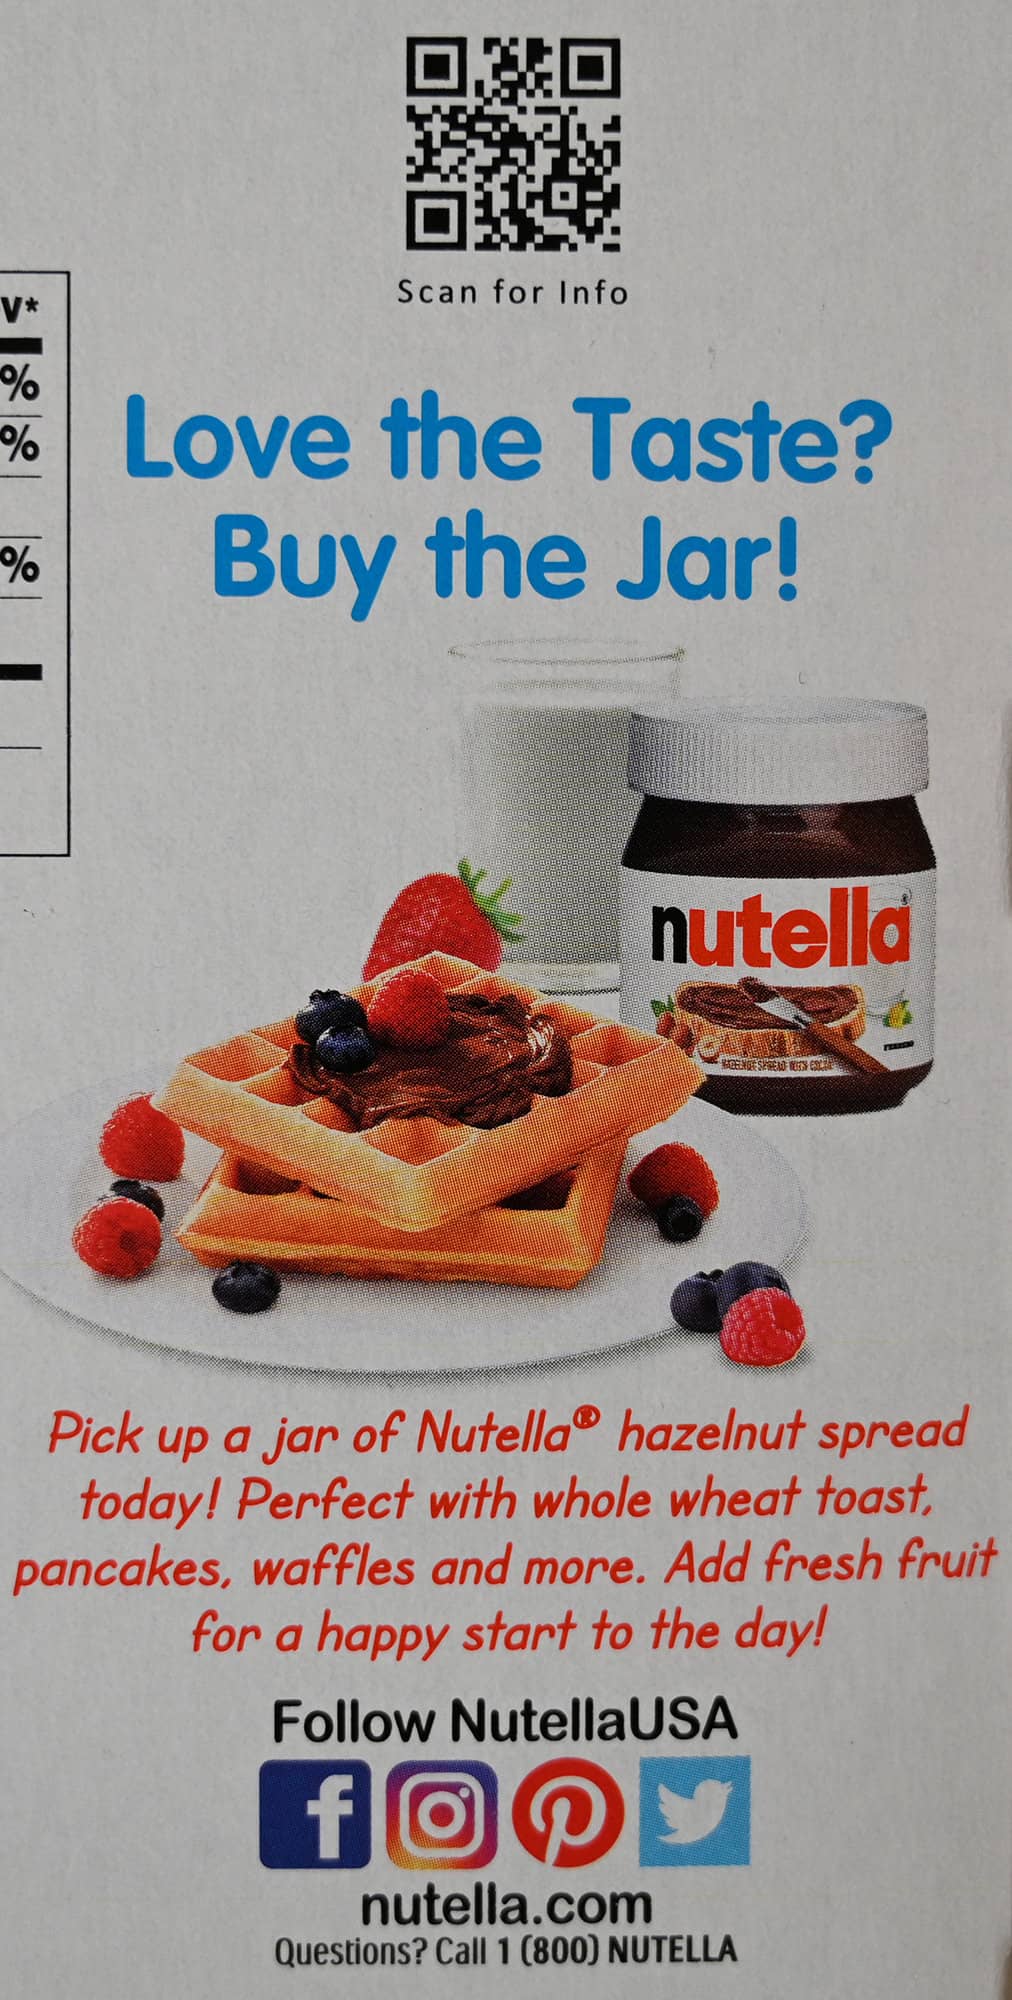 Image of the back of the box showing the QR code for more information and showing you can pickup a jar of Nutella if you love the taste of the Nutella & Go.